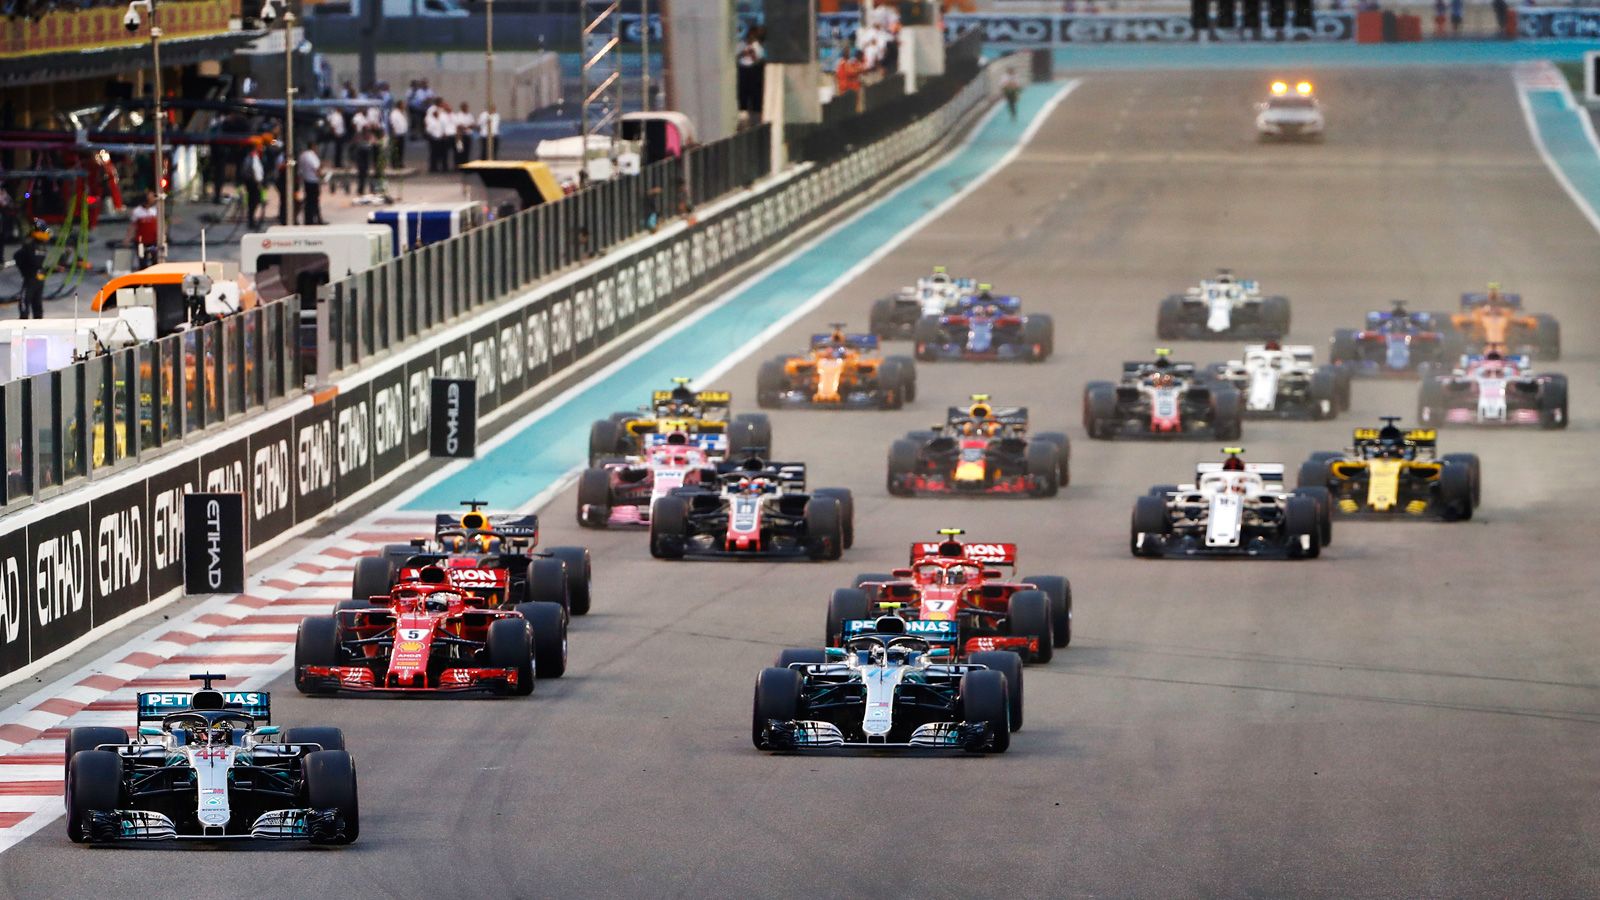 F1 organizers demand more transparency from Liberty Media